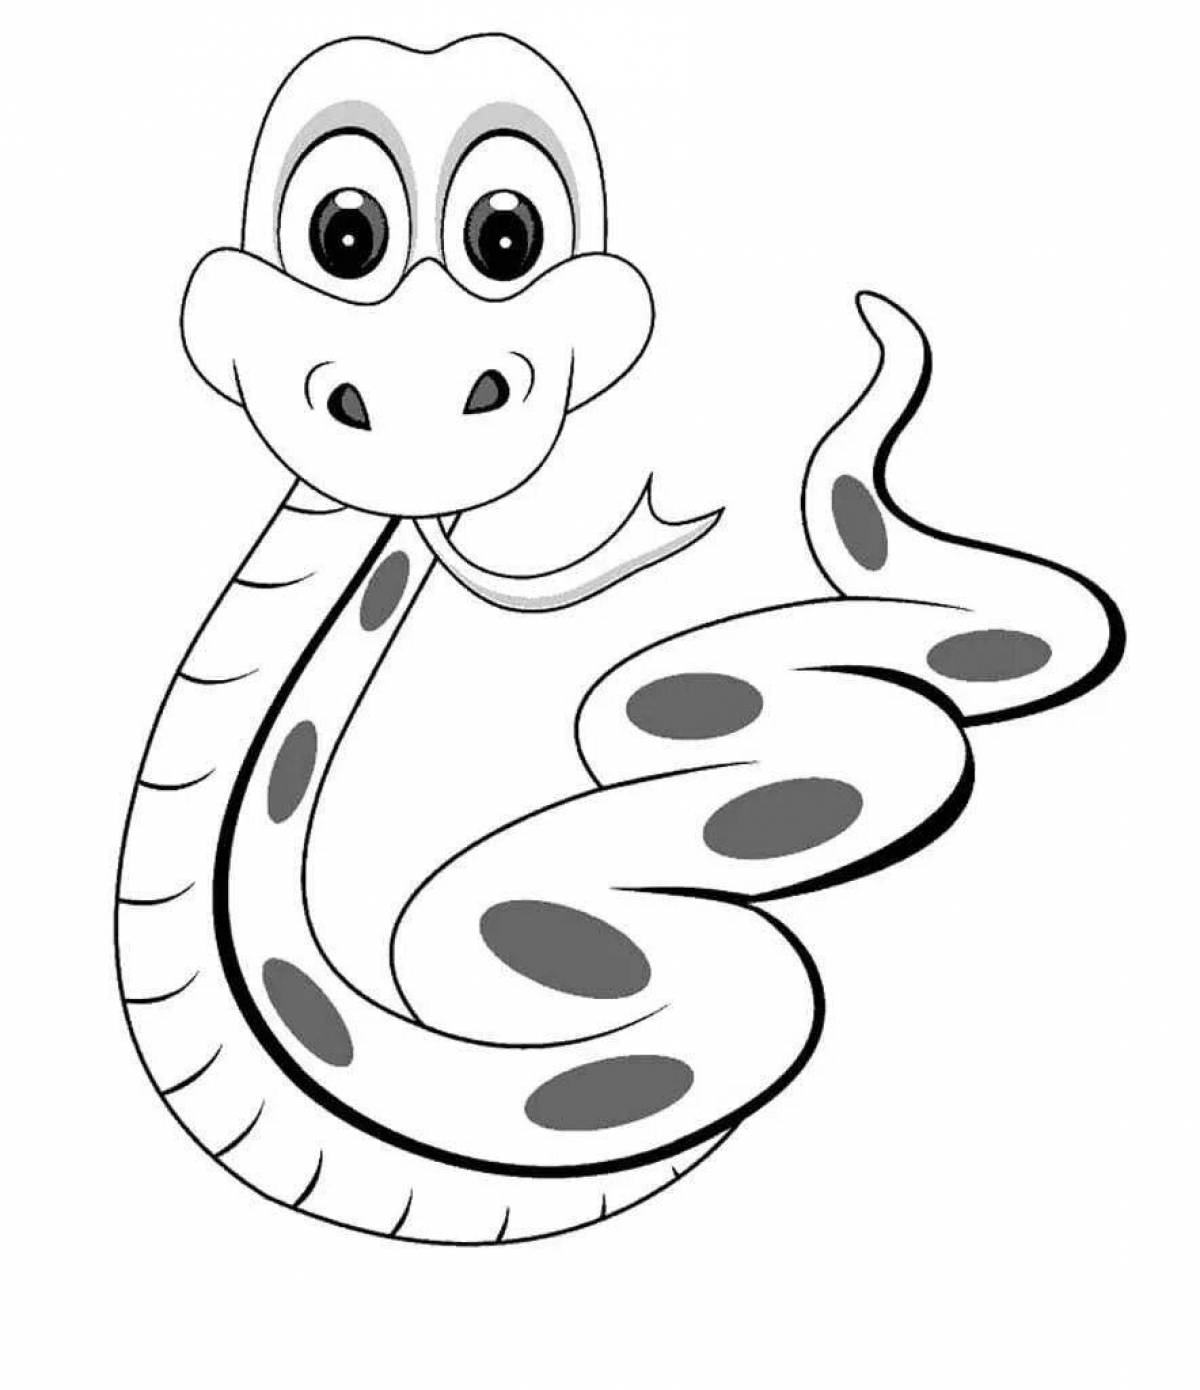 Fun snake coloring for minors